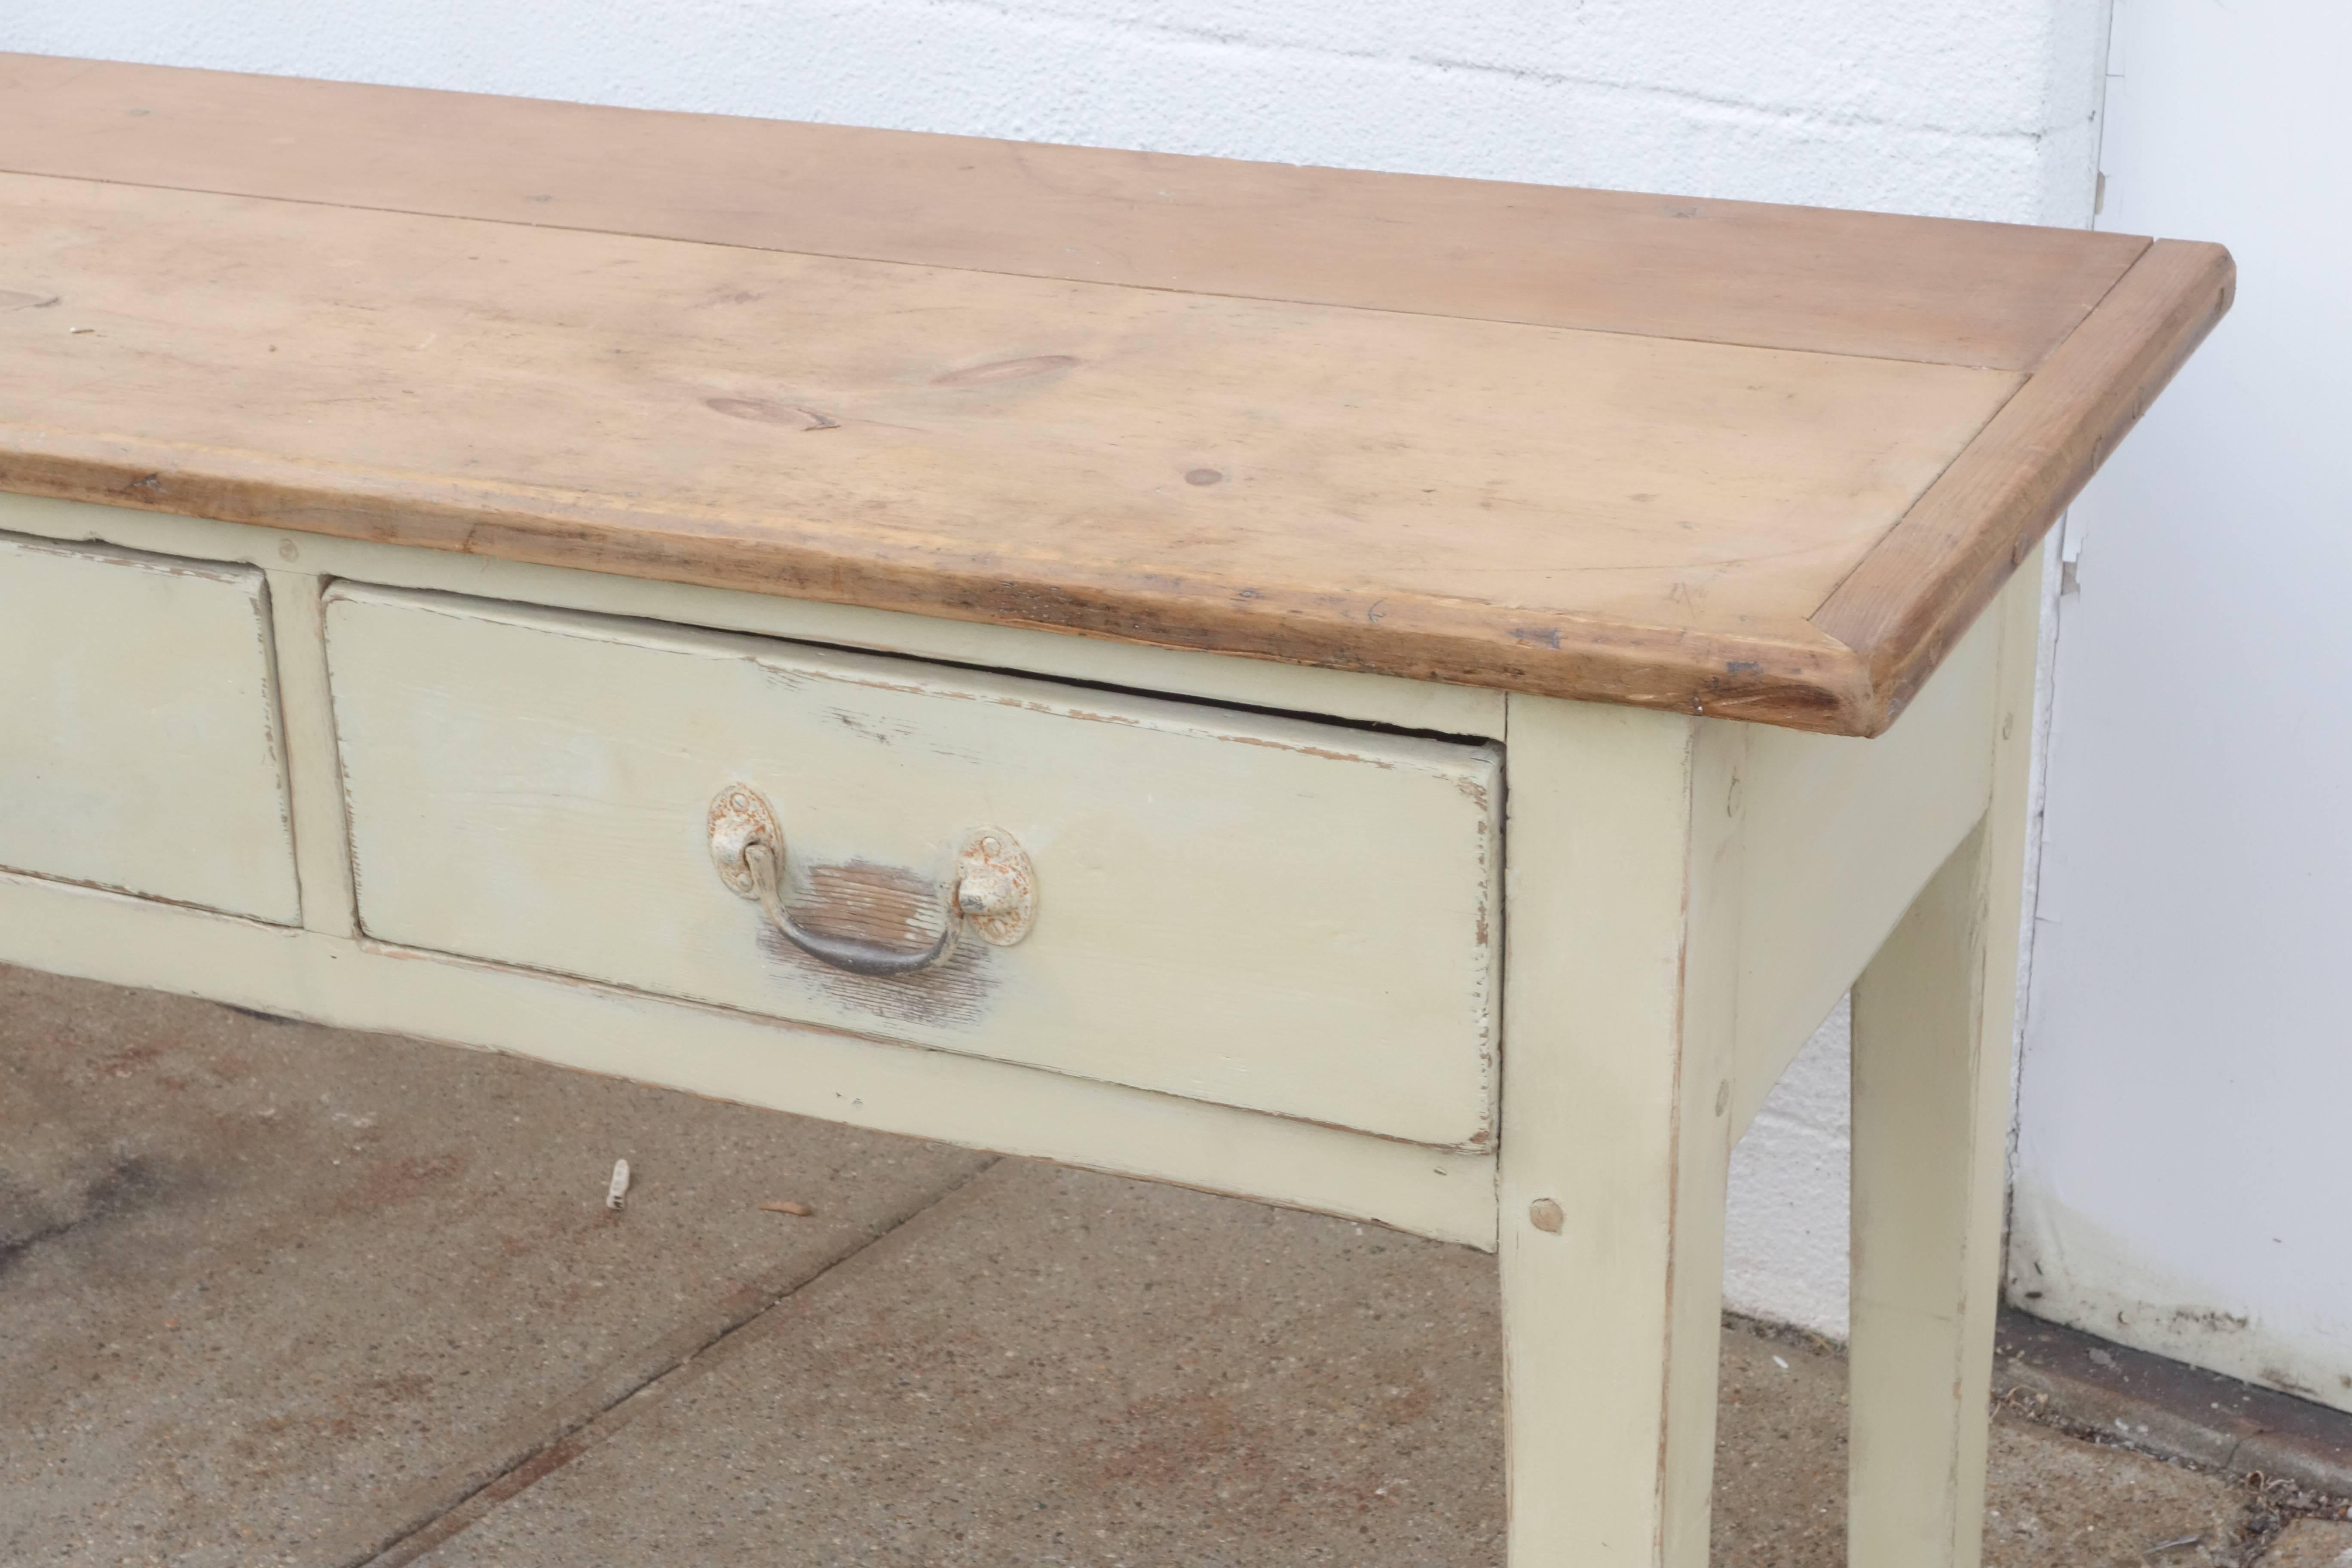 Country house server, repainted at a later date. Please contact for current availability or more information.